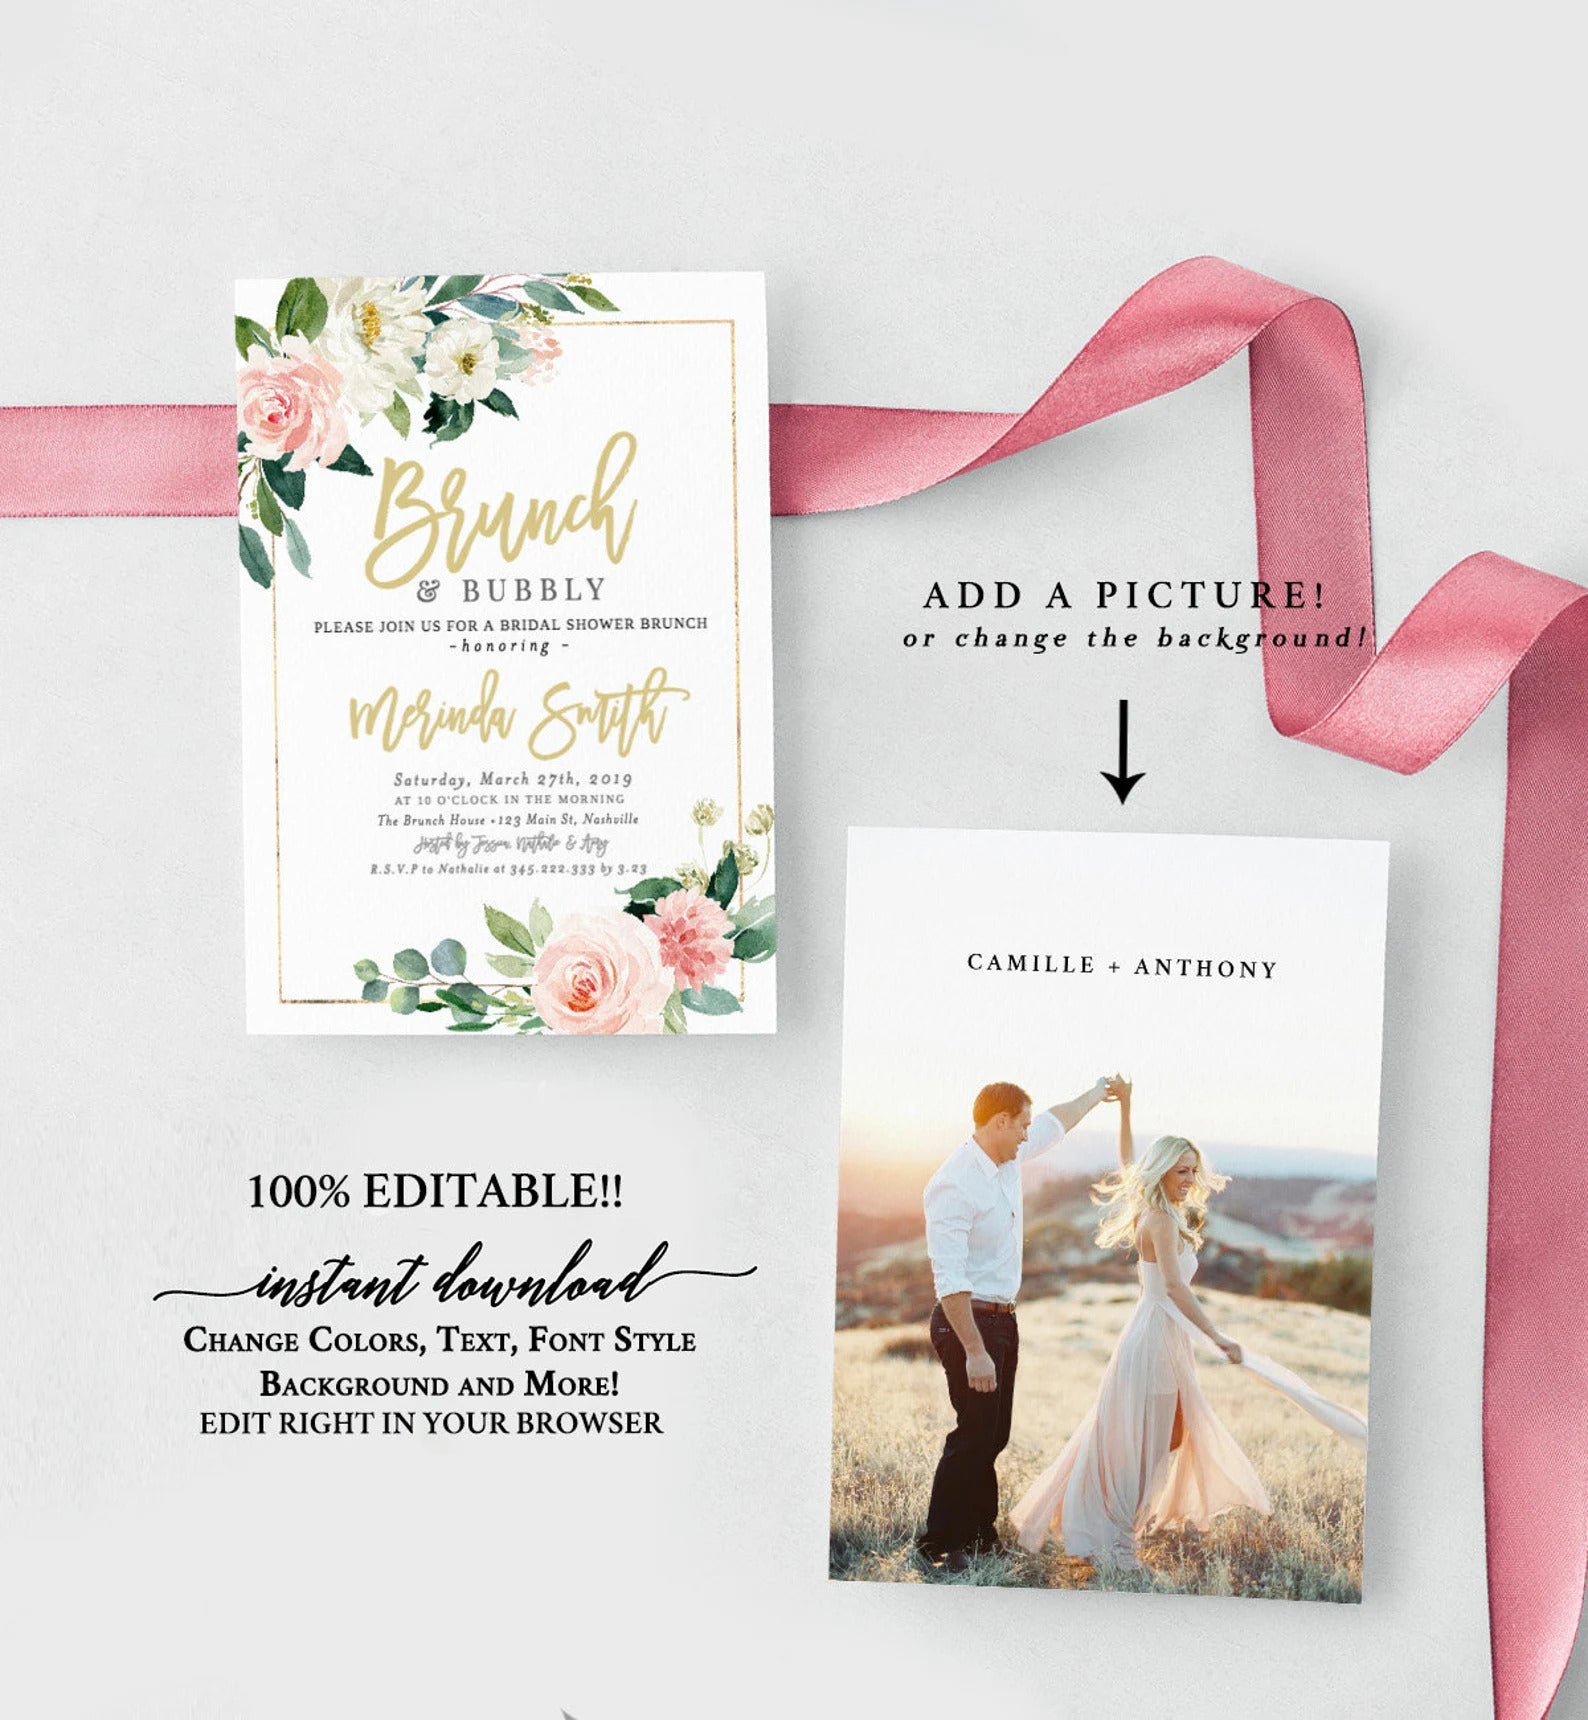 Watercolor Floral Brunch and Bubbly Invitation